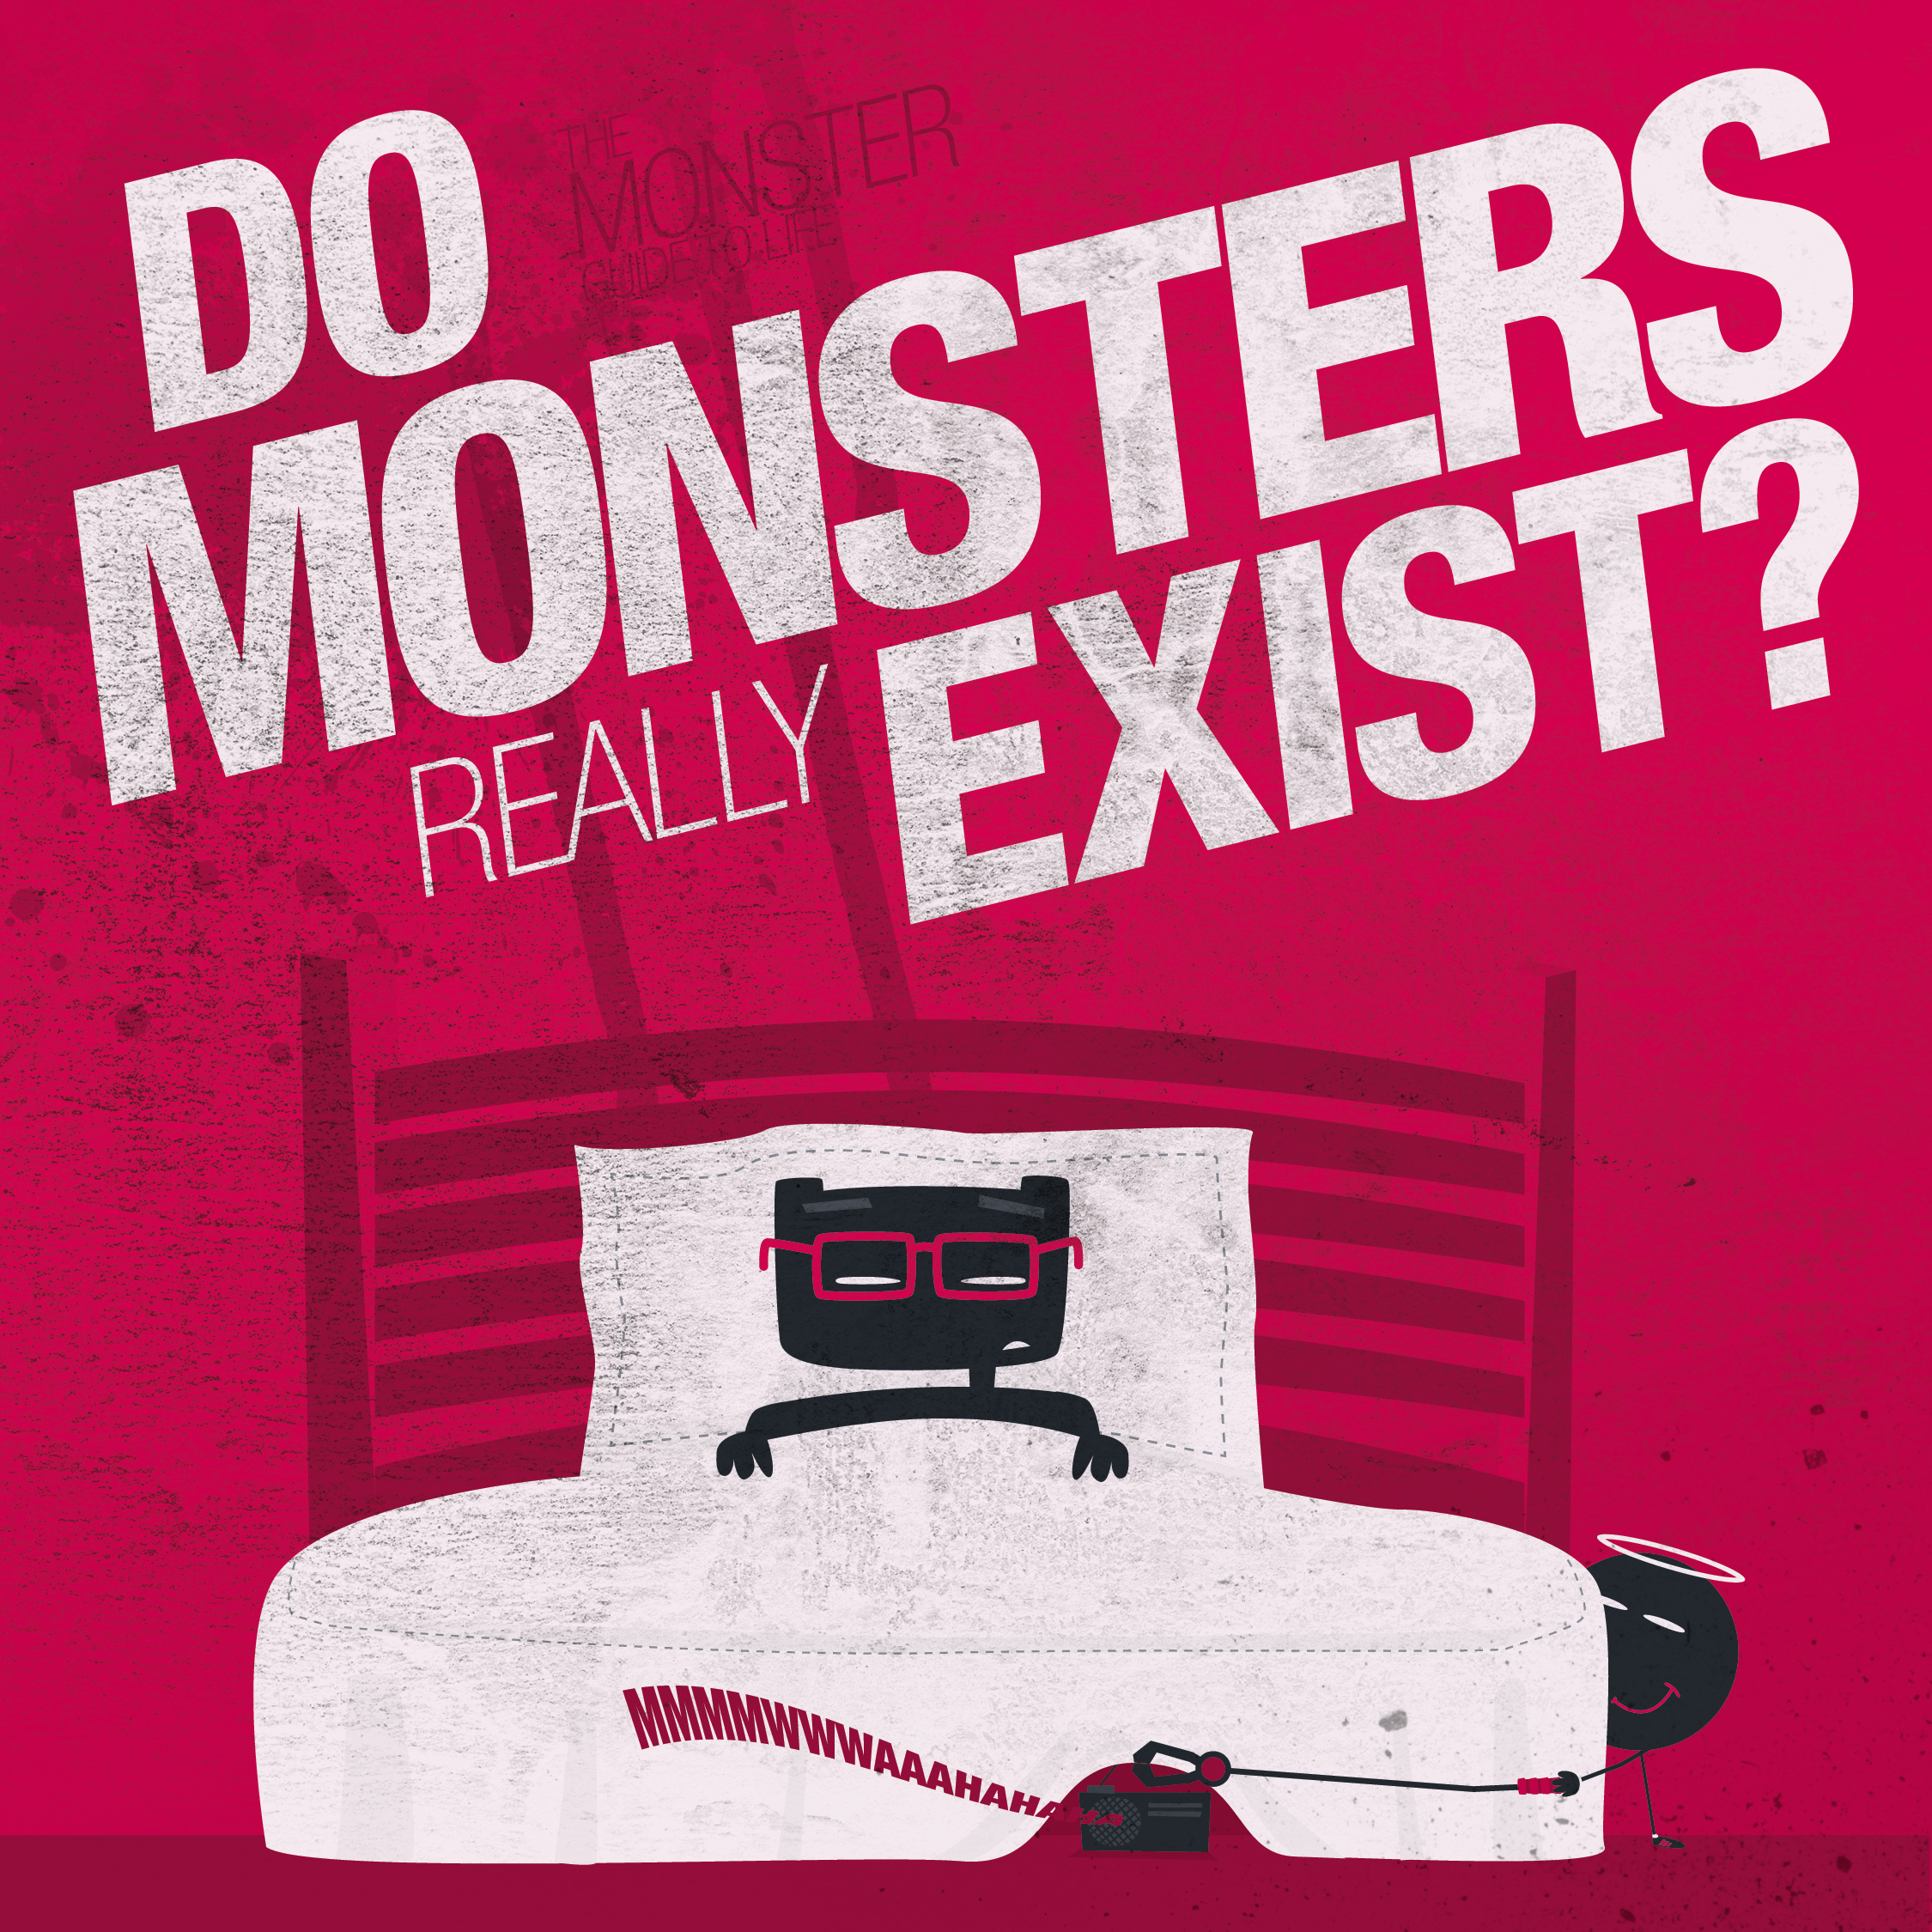 Do Monsters really exist?